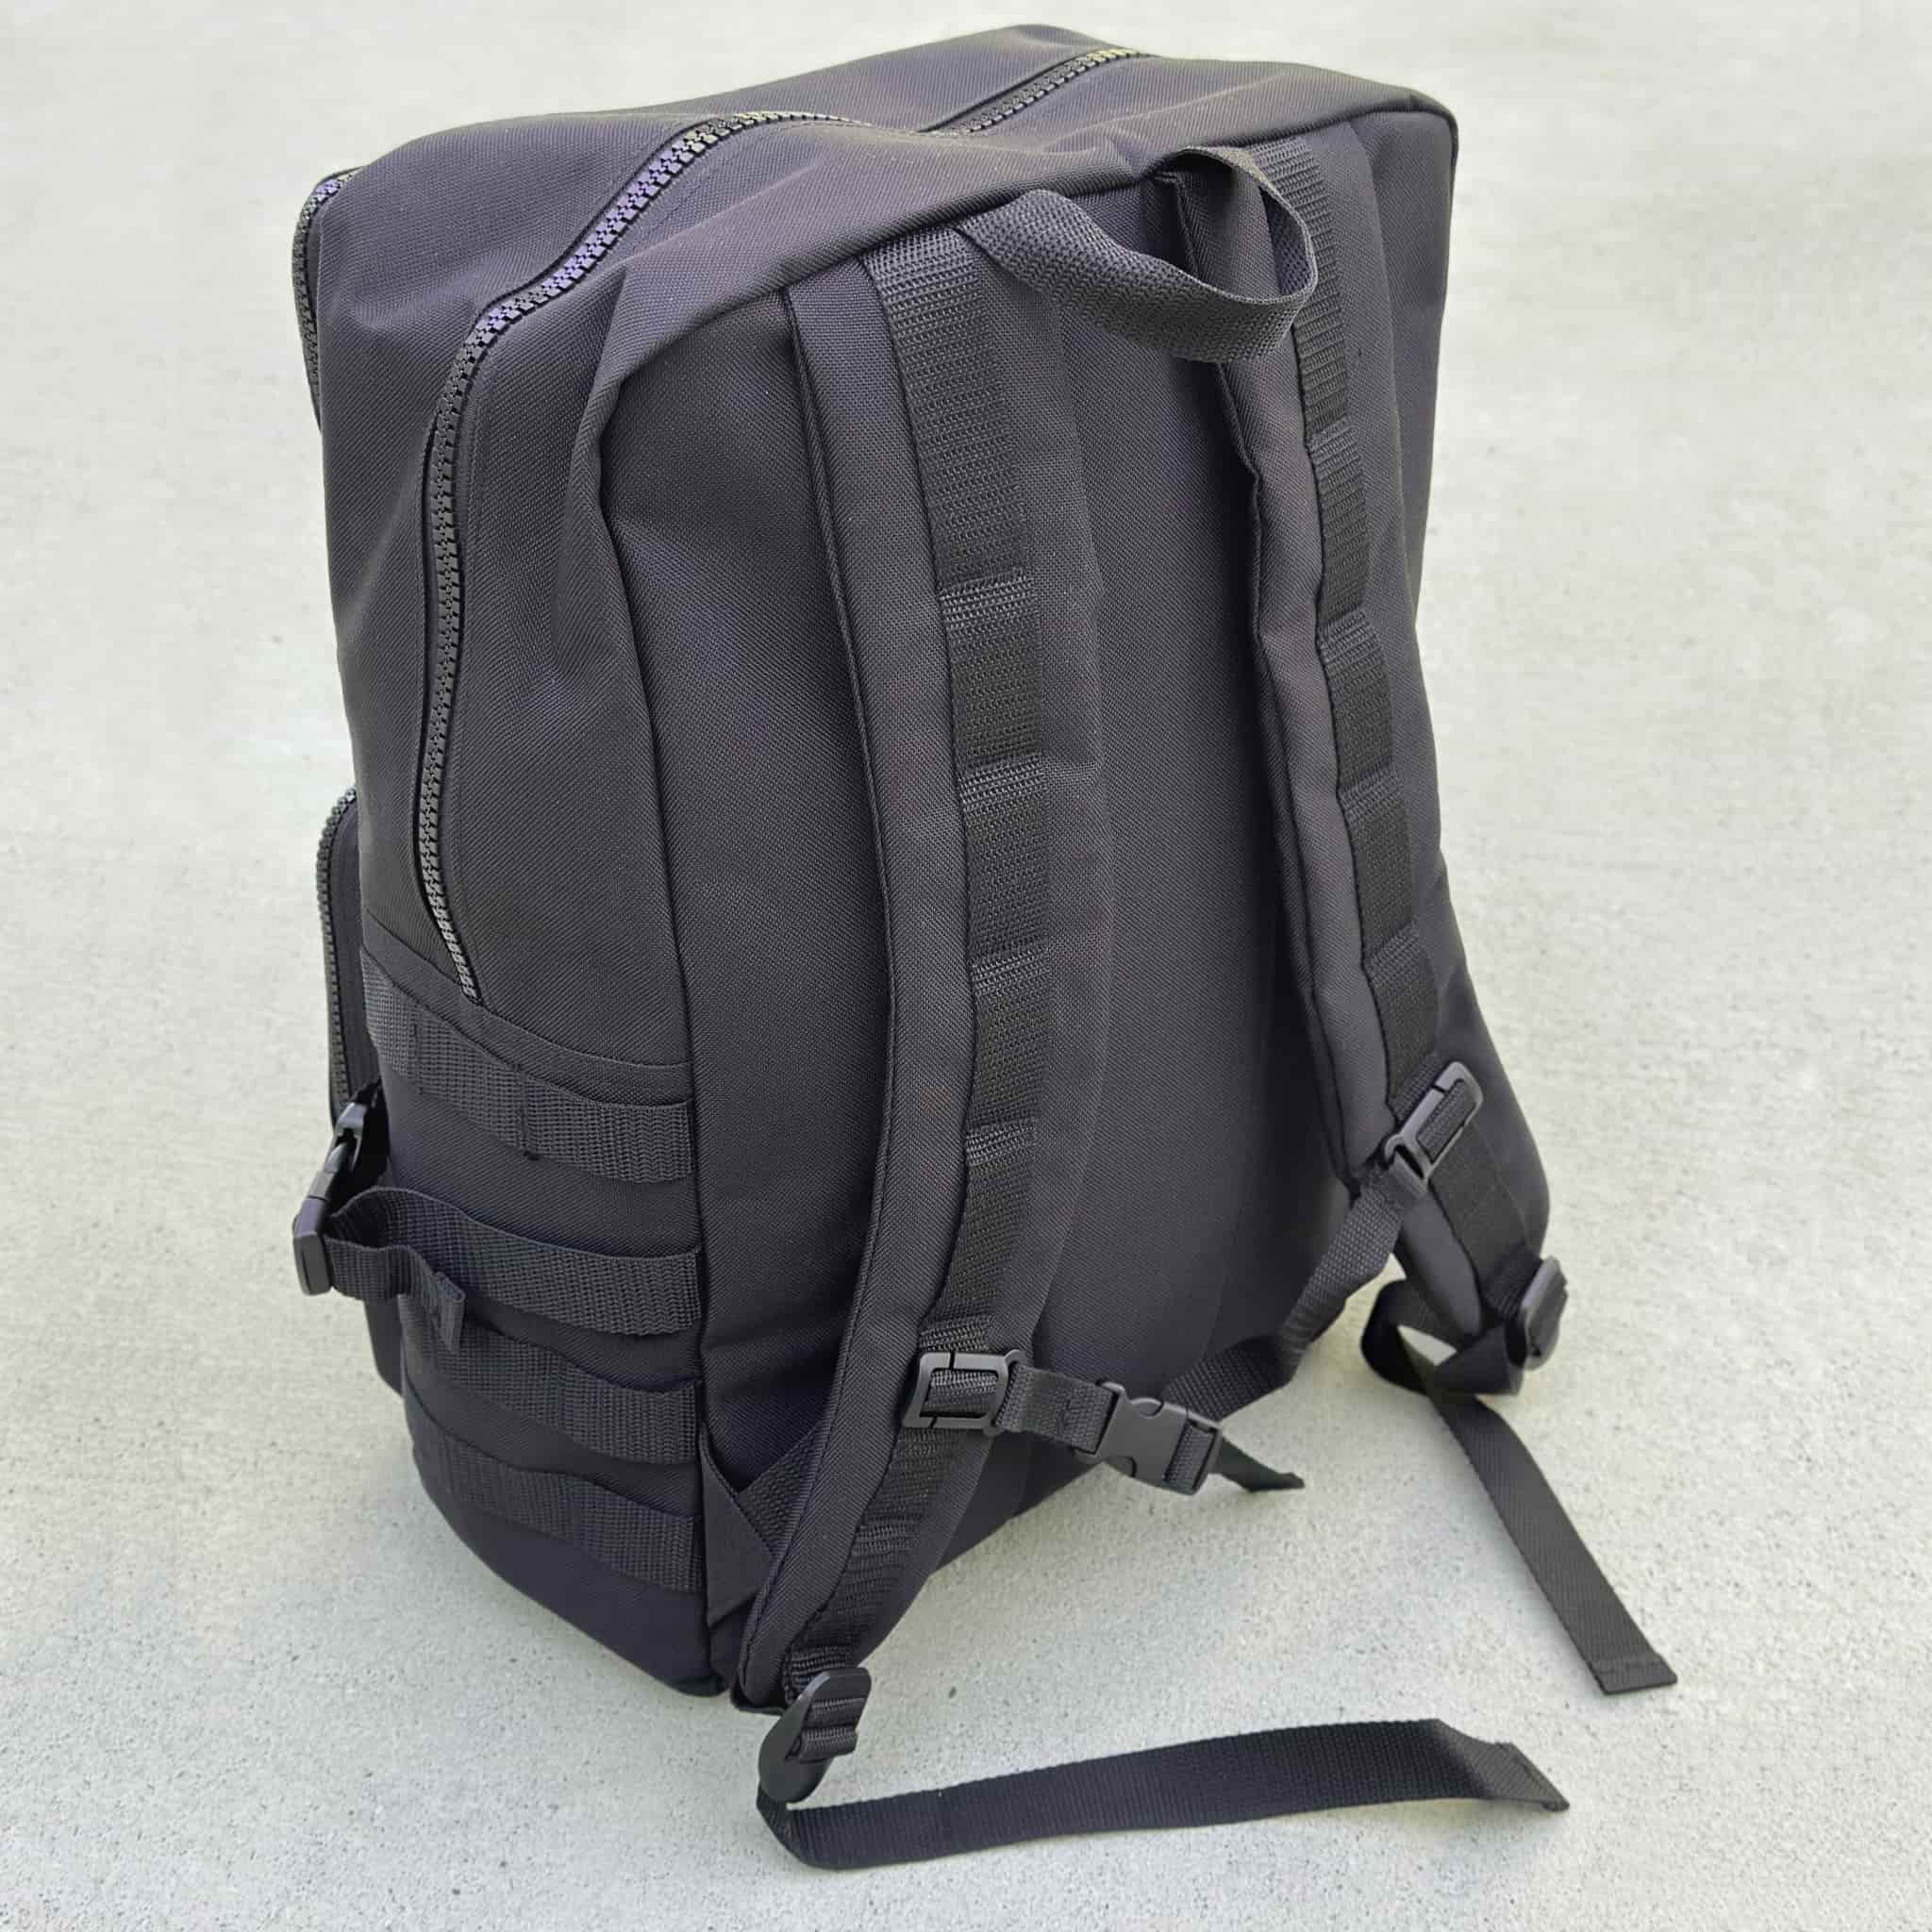 The Tactical Bag in black with hook and loop areas and MOLLE system on the back, seen from the carrying side